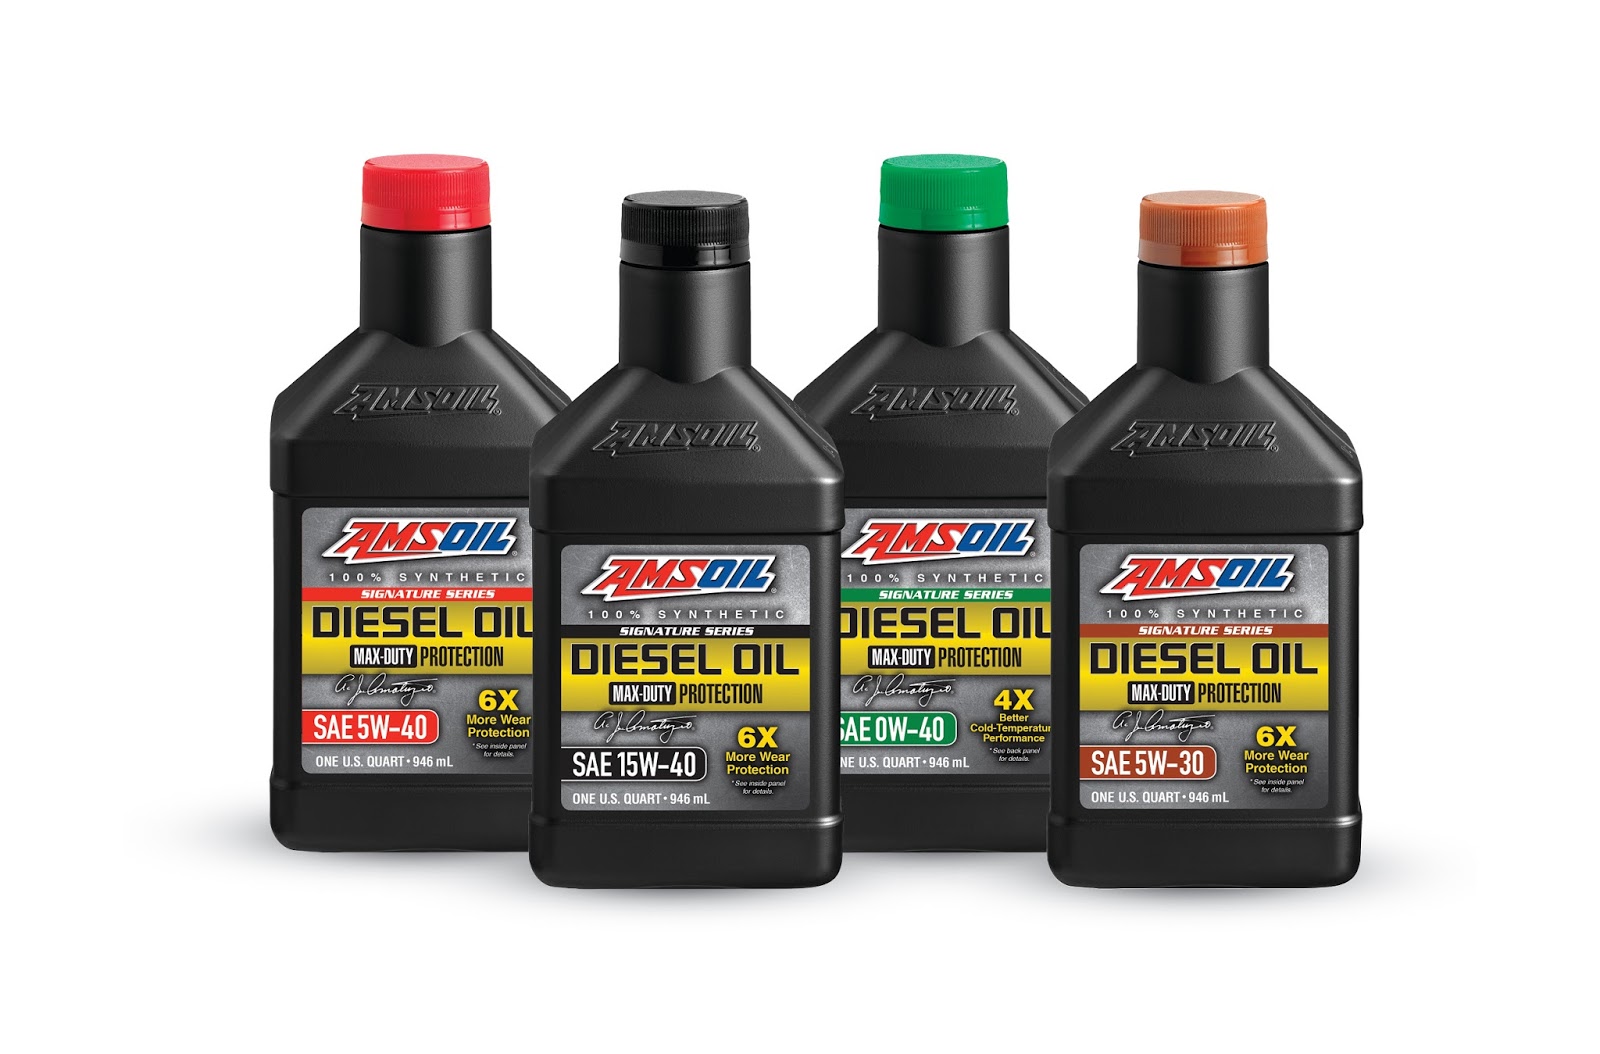 Signature series synthetic. AMSOIL 5w40 Diesel. AMSOIL Heavy-Duty Synthetic Diesel Oil SAE 5w-40. AMSOIL Signature 5.40. AMSOIL 5w40 дизель.